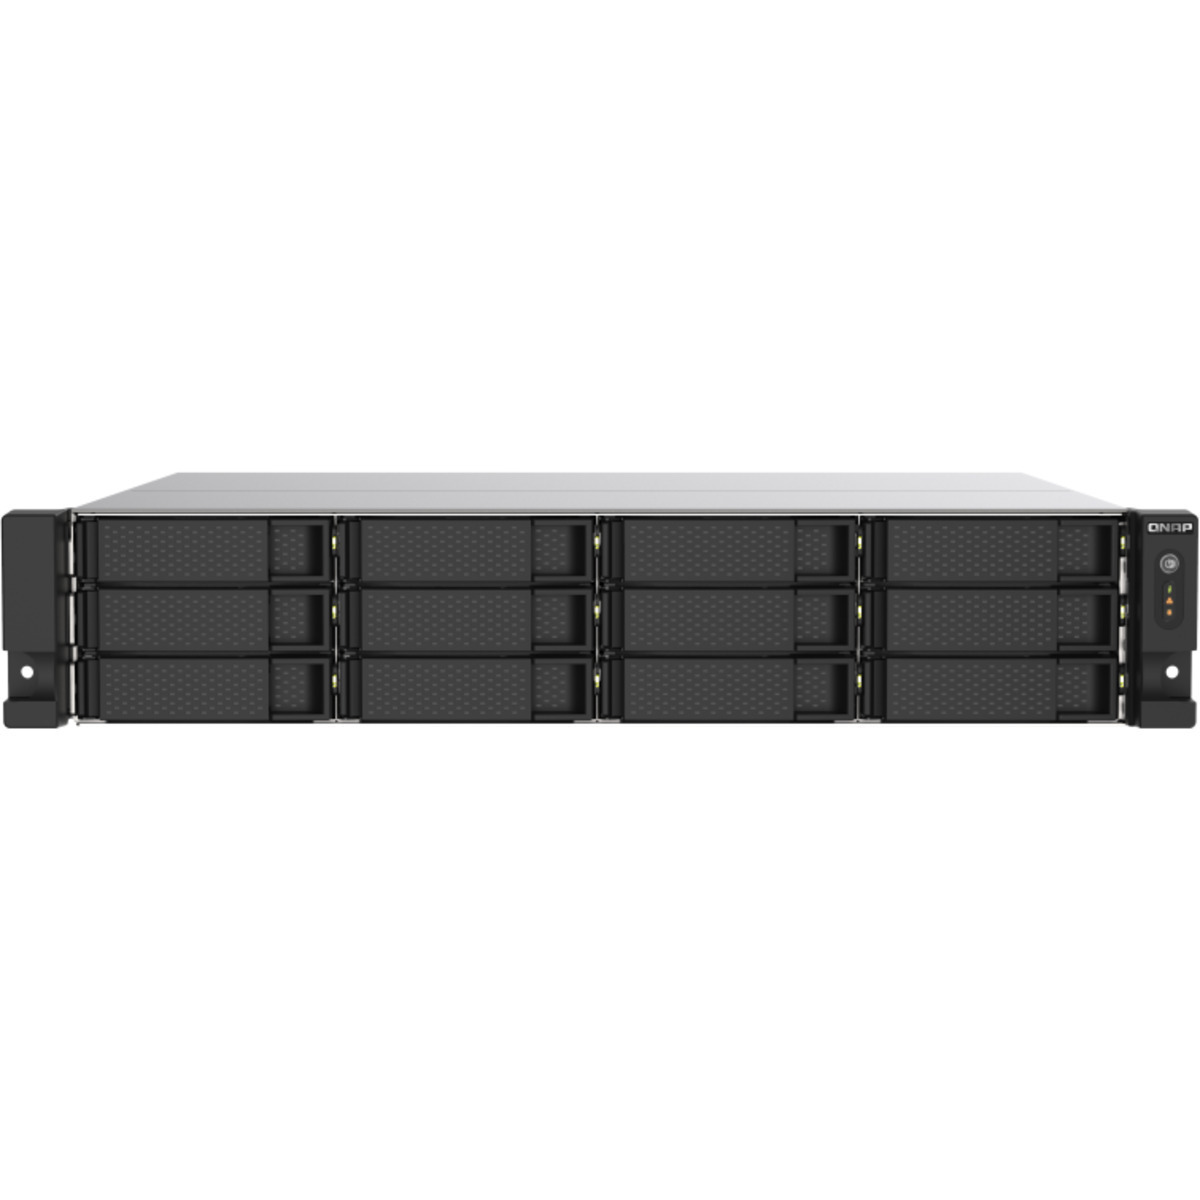 QNAP TS-1273AU-RP 176tb 12-Bay RackMount Multimedia / Power User / Business NAS - Network Attached Storage Device 8x22tb Western Digital Gold WD221KRYZ 3.5 7200rpm SATA 6Gb/s HDD ENTERPRISE Class Drives Installed - Burn-In Tested - FREE RAM UPGRADE TS-1273AU-RP